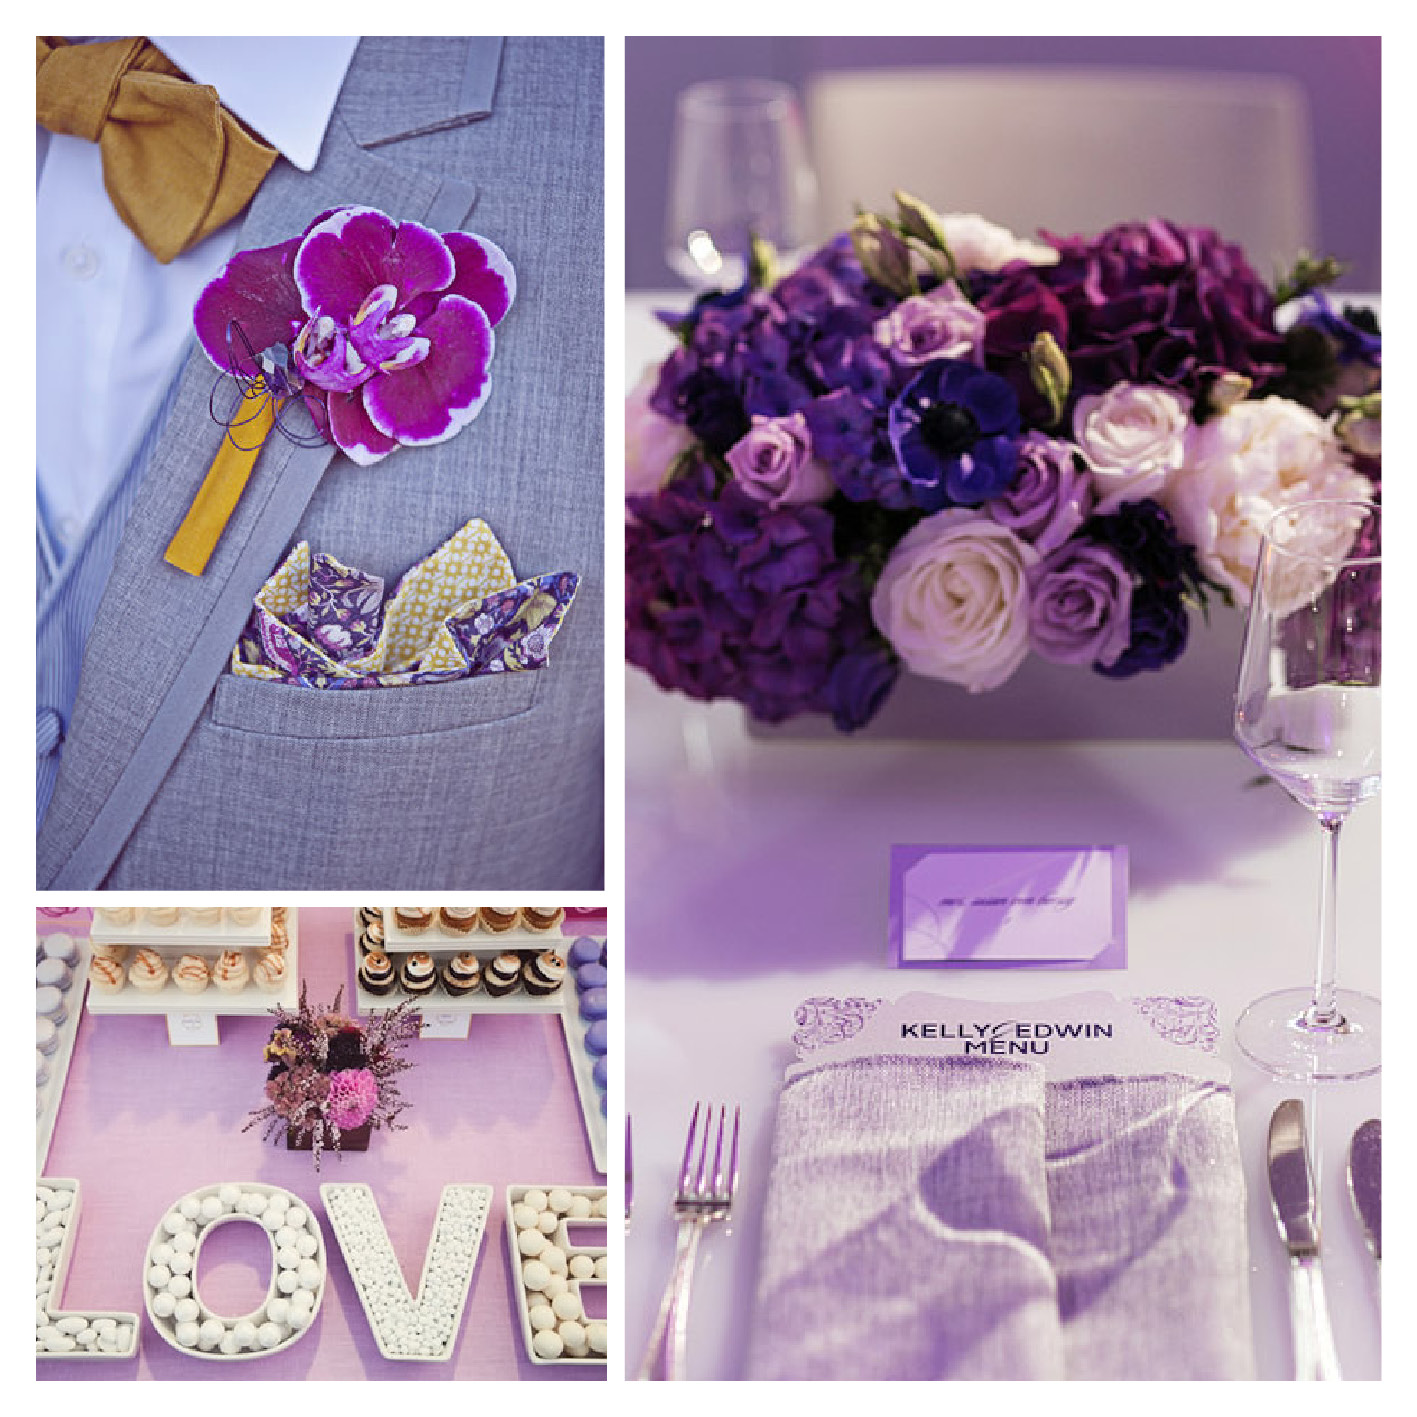 The Wedding Colour of The Year: Radiant Orchid